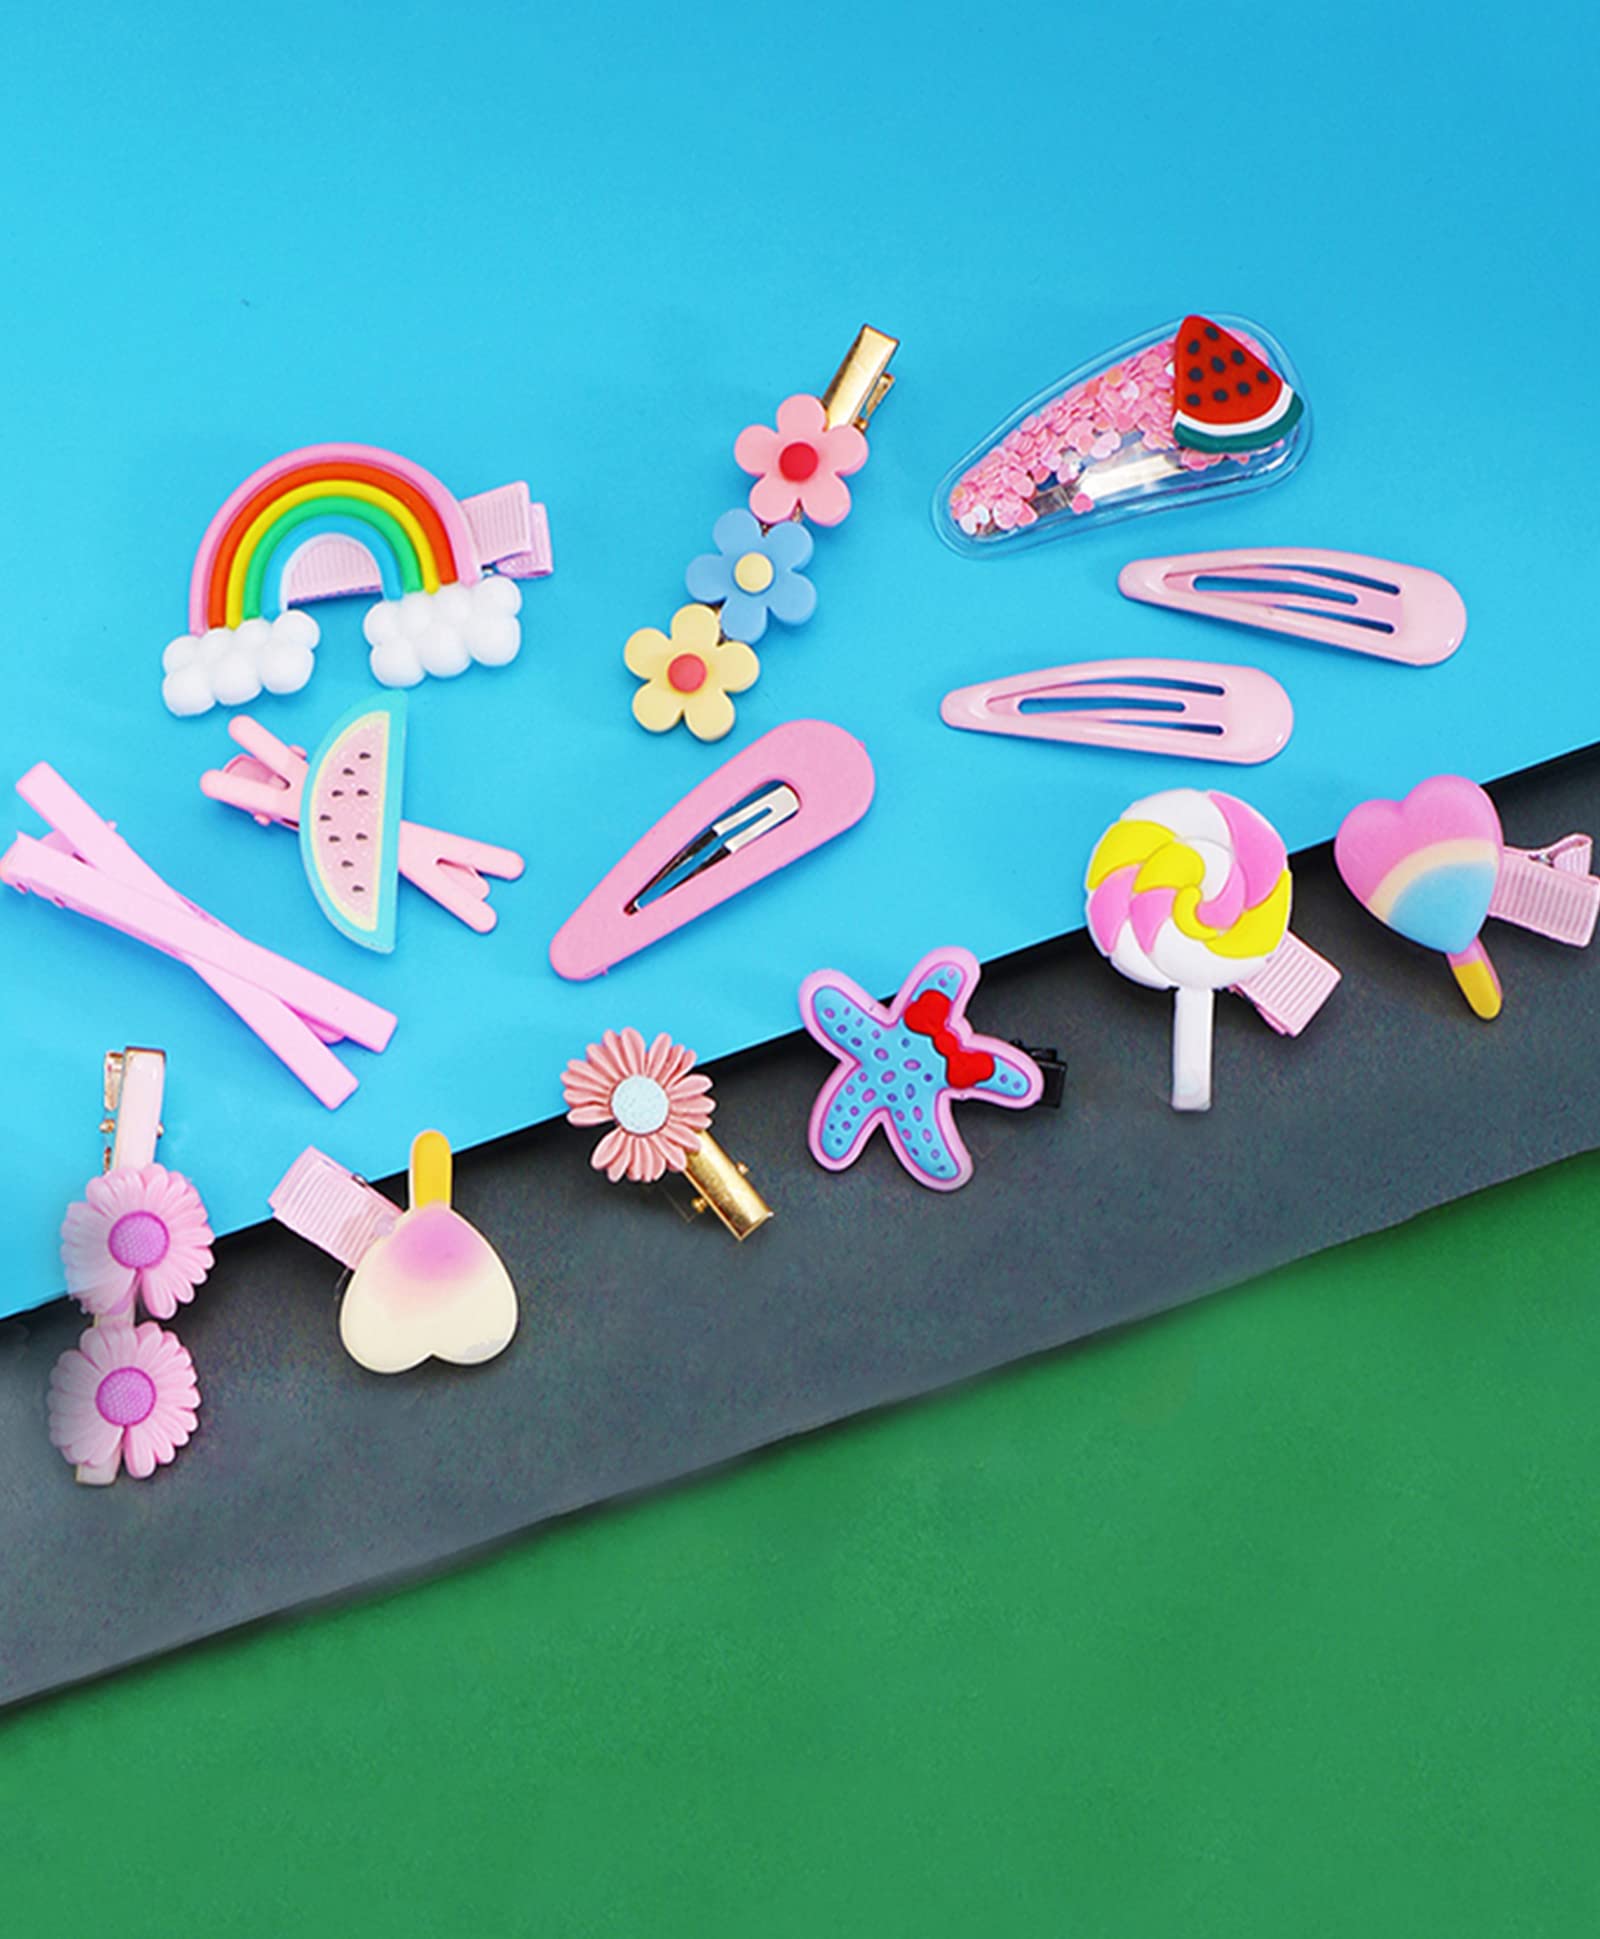 Melbees by Yellow Chimes Hair Clips for Girls Kids Hair Clip Hair Accessories For Girls Cute Characters Pretty Tiny Hair Clips for Baby Girls 14 Pcs Pink Alligator Clips for Hair Baby Hair Clips